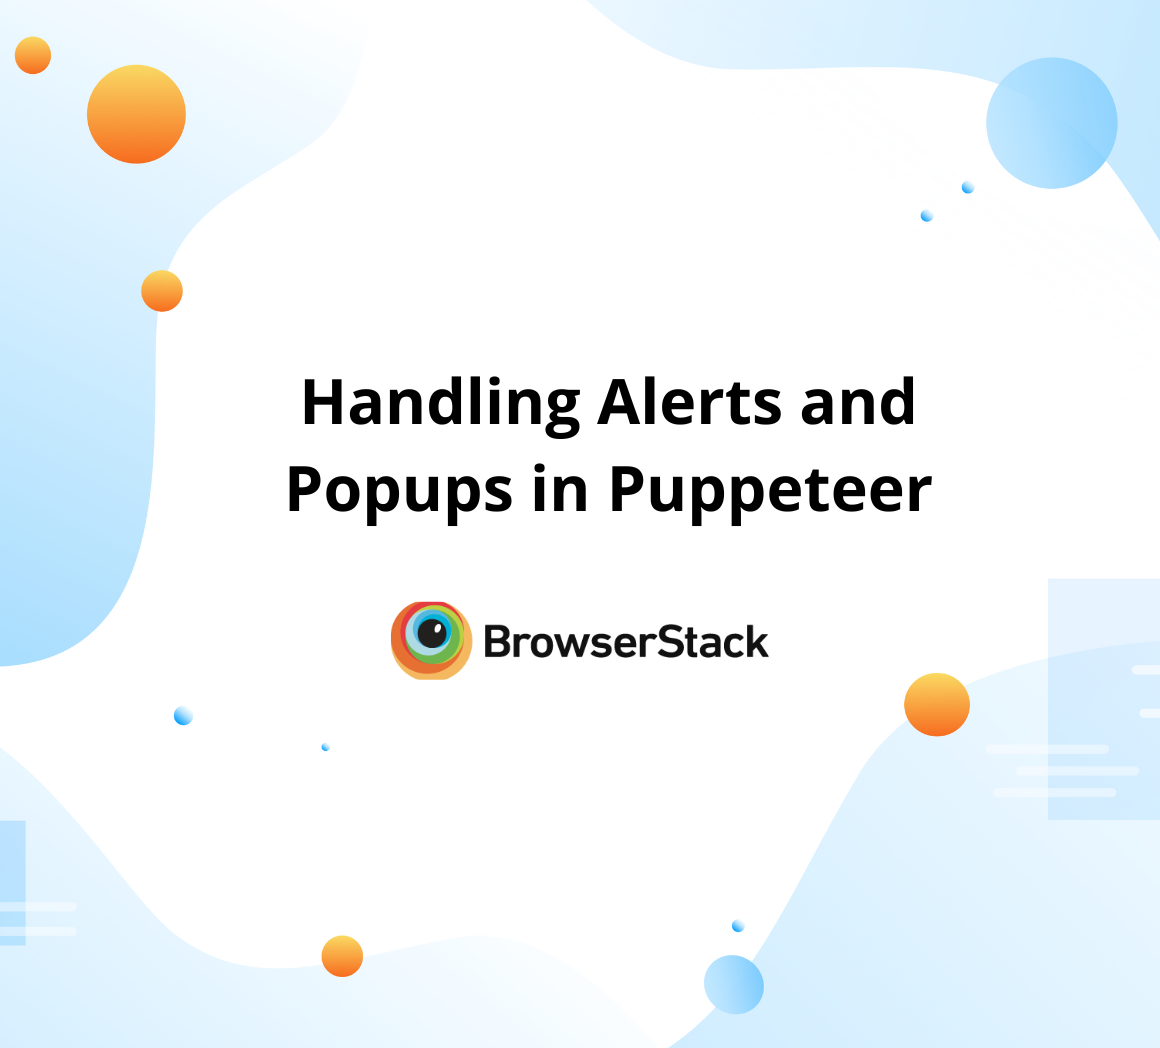 Handling Alerts and Popups in Puppeteer